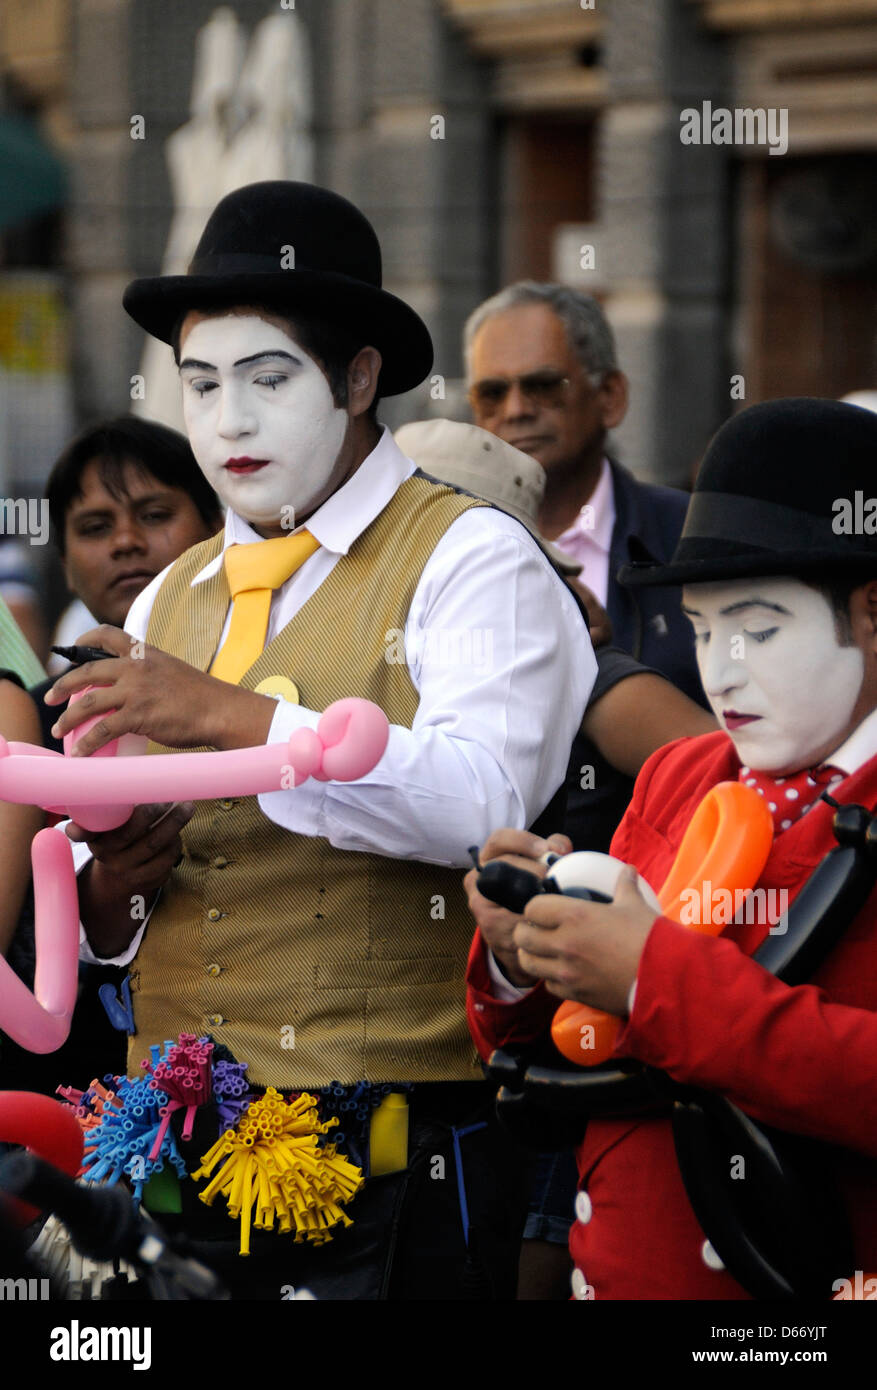 White-faced street performers entertain crowds outside Catedral Metroploitana in Plaza de Armas. Santiago, Chile Stock Photo